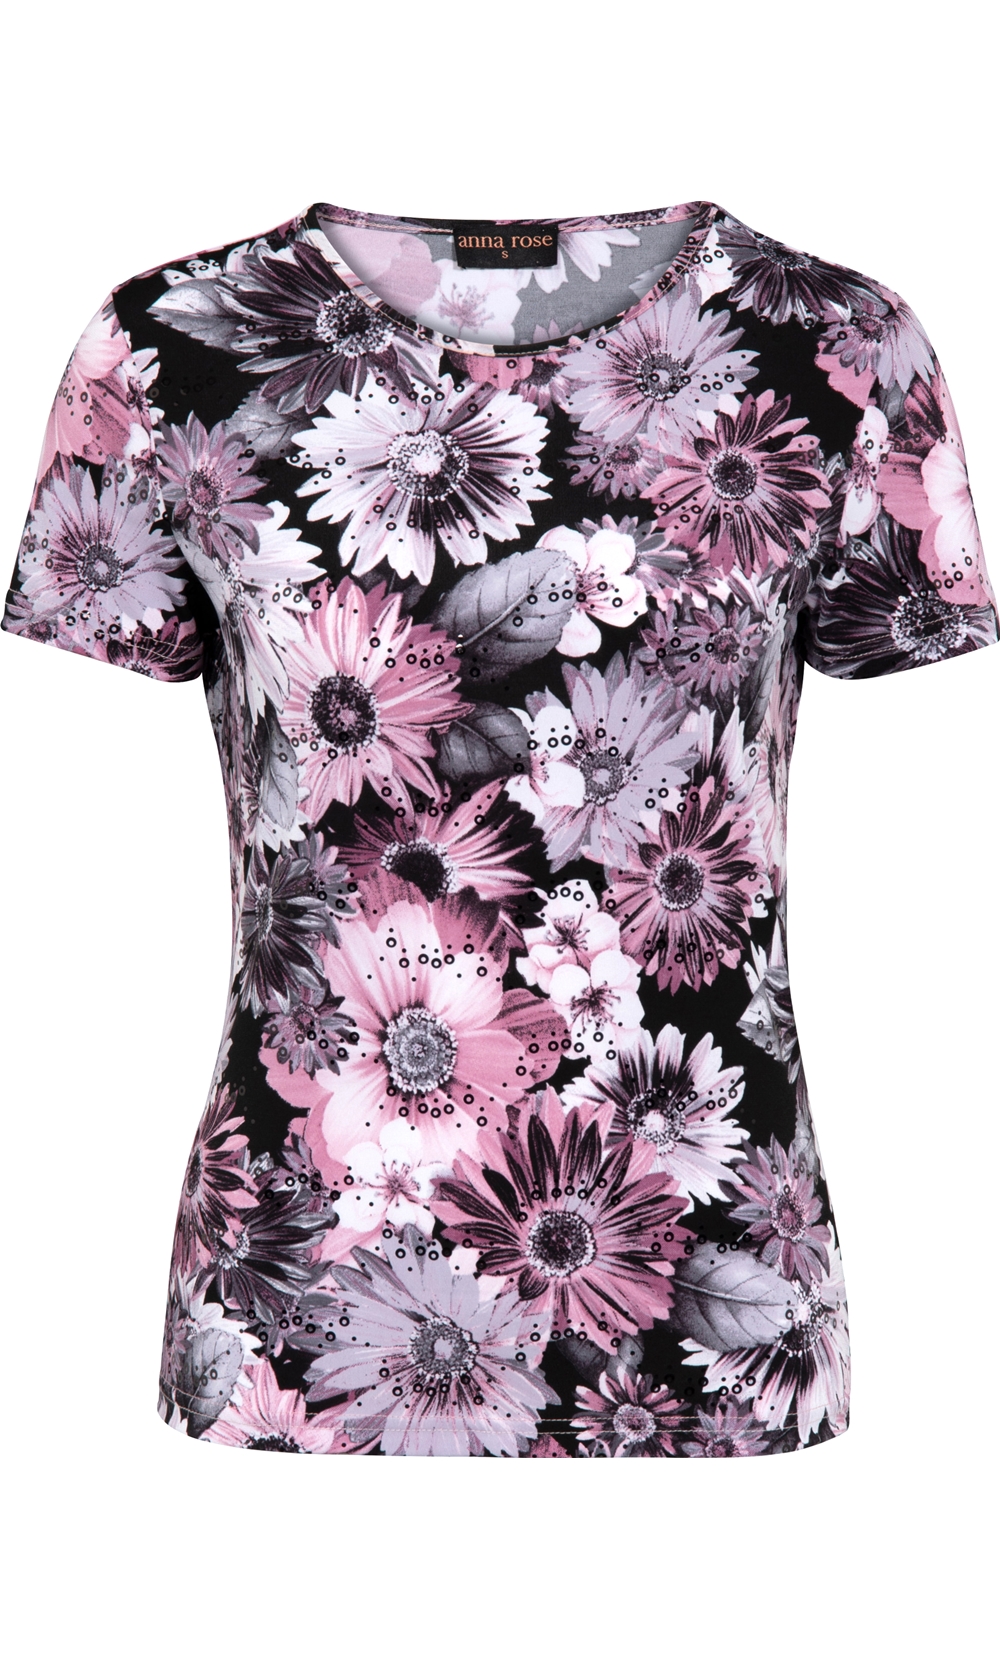 Anna Rose Printed Short Sleeve Stretch Top